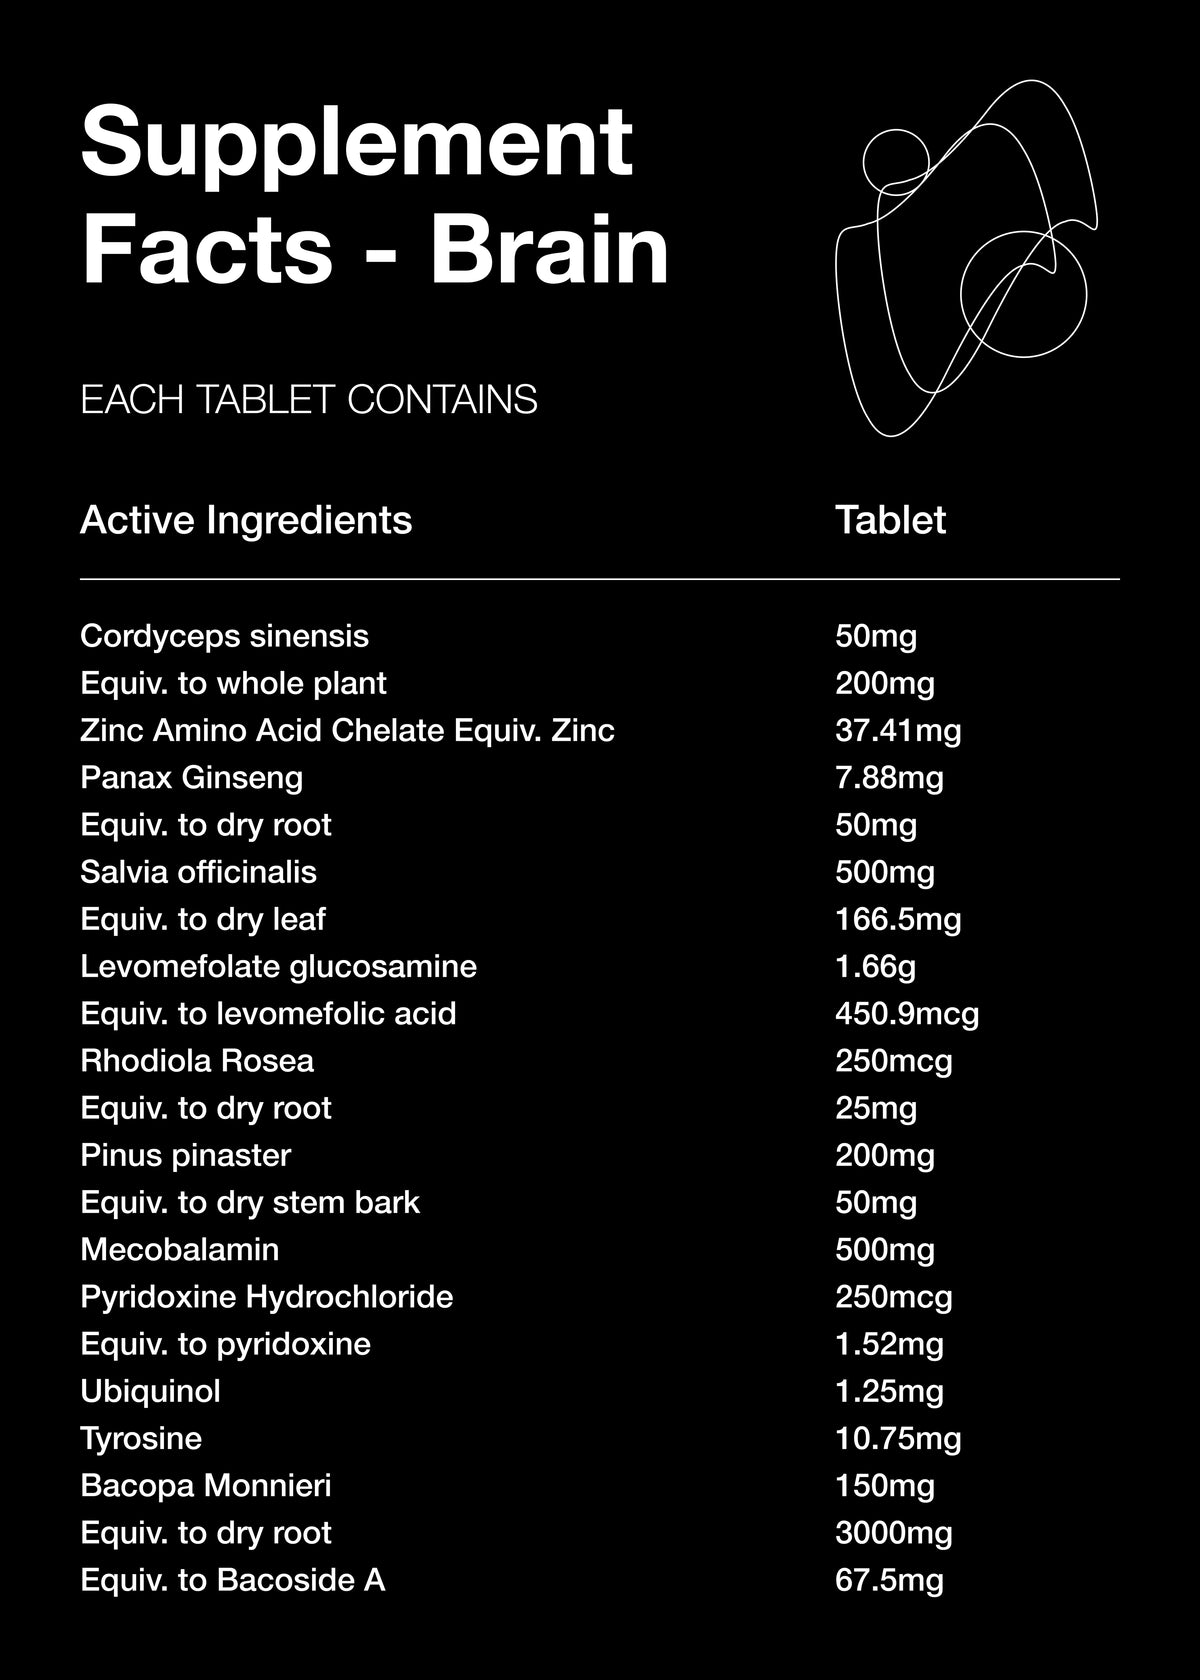 Detailed supplement facts label for &#39;Brain&#39; nootropic, highlighting ingredients for optimal mental performance, energy, and brain health